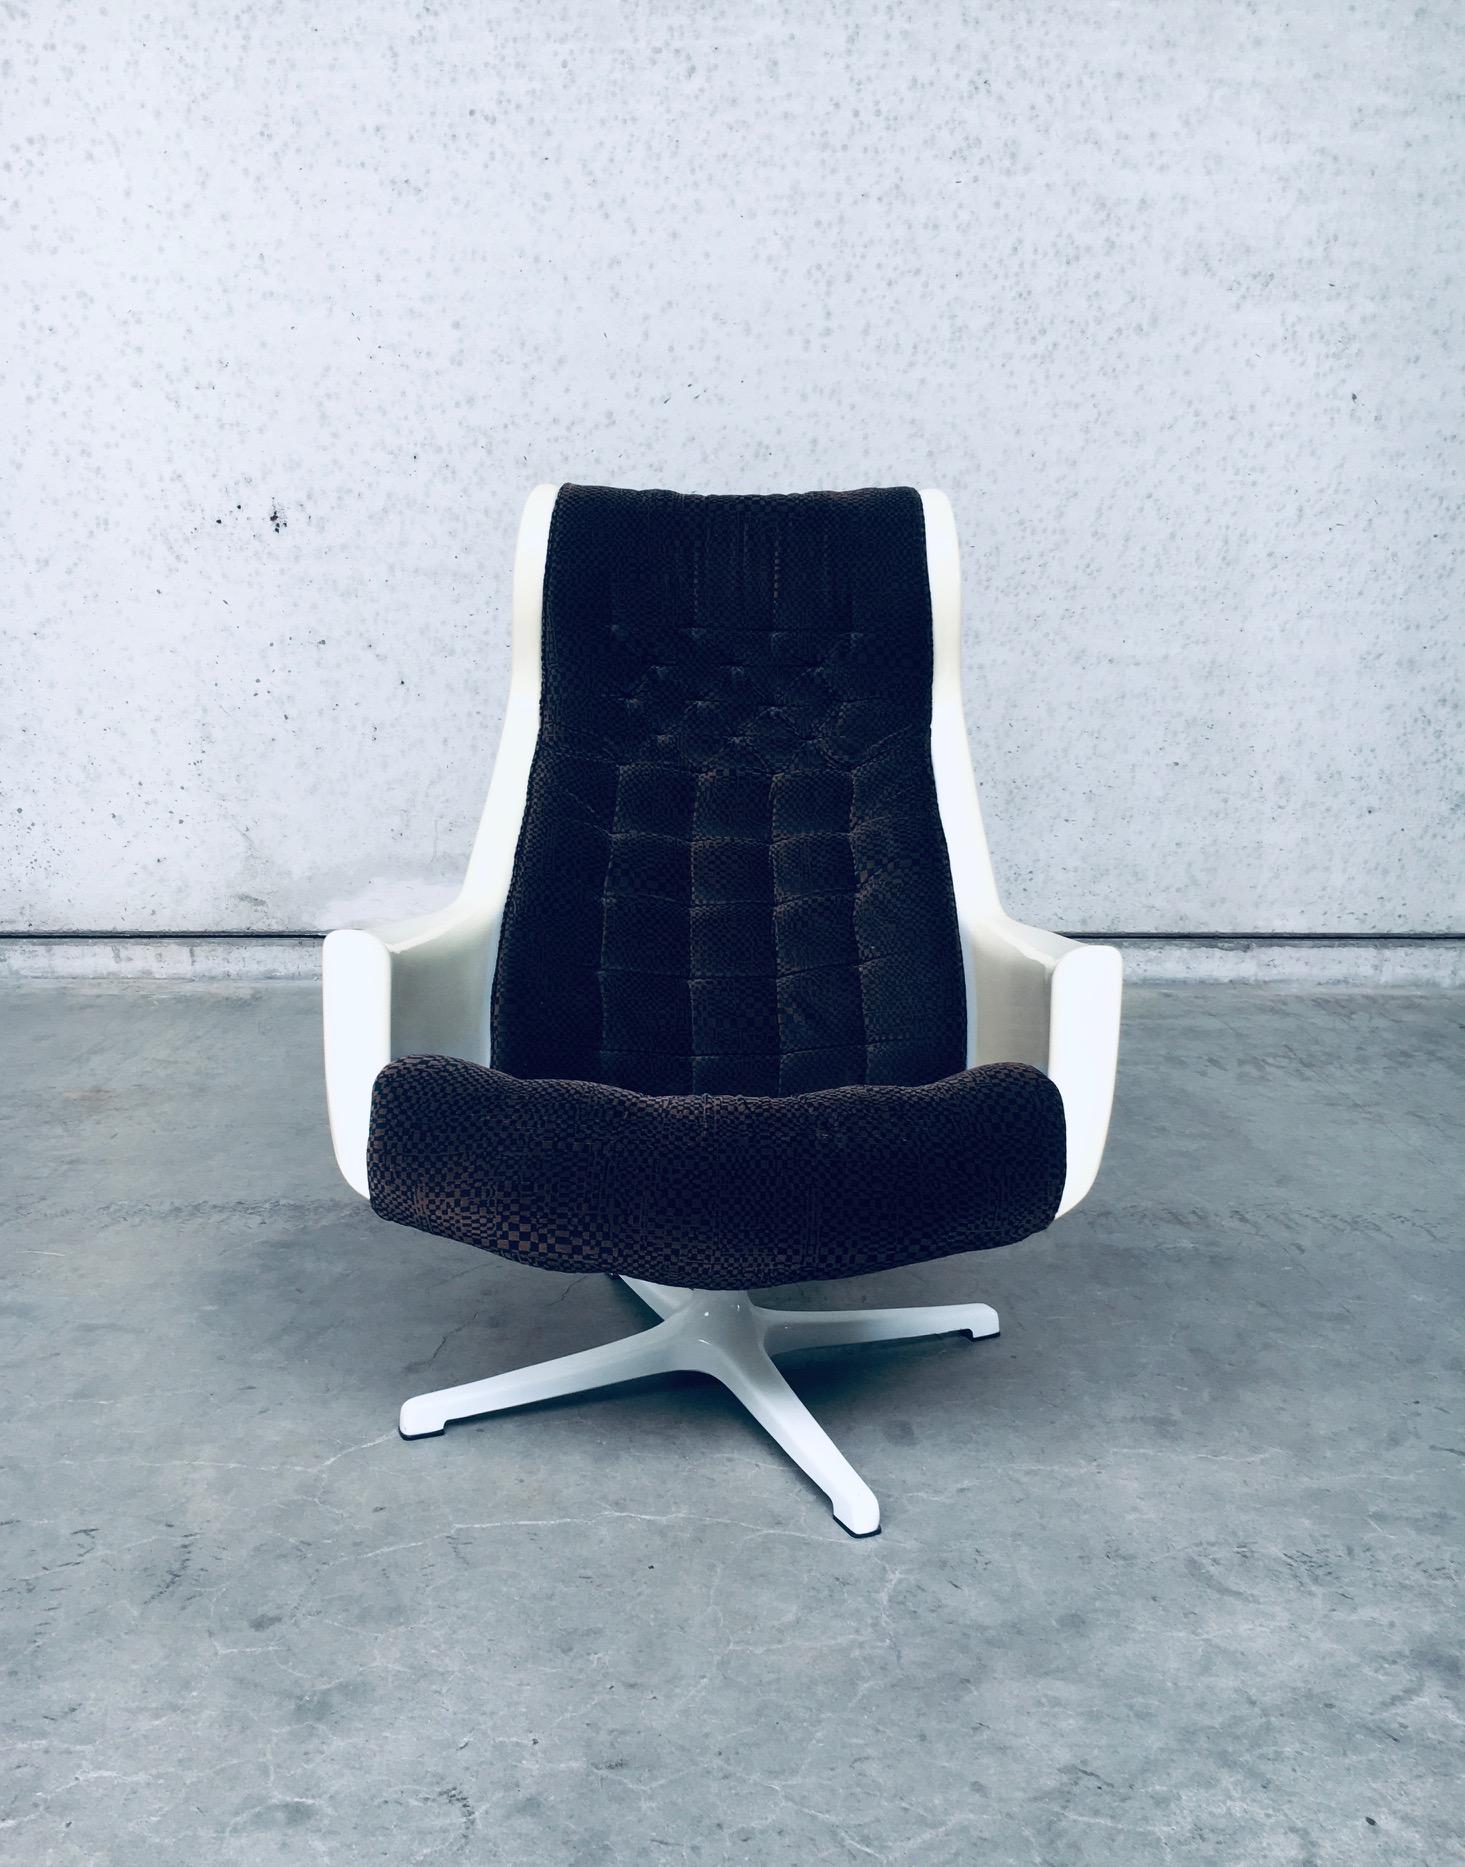 Midcentury Modern 'Galaxy' Lounge Chair by Alf Svensson for Dux, Denmark 1960's 3